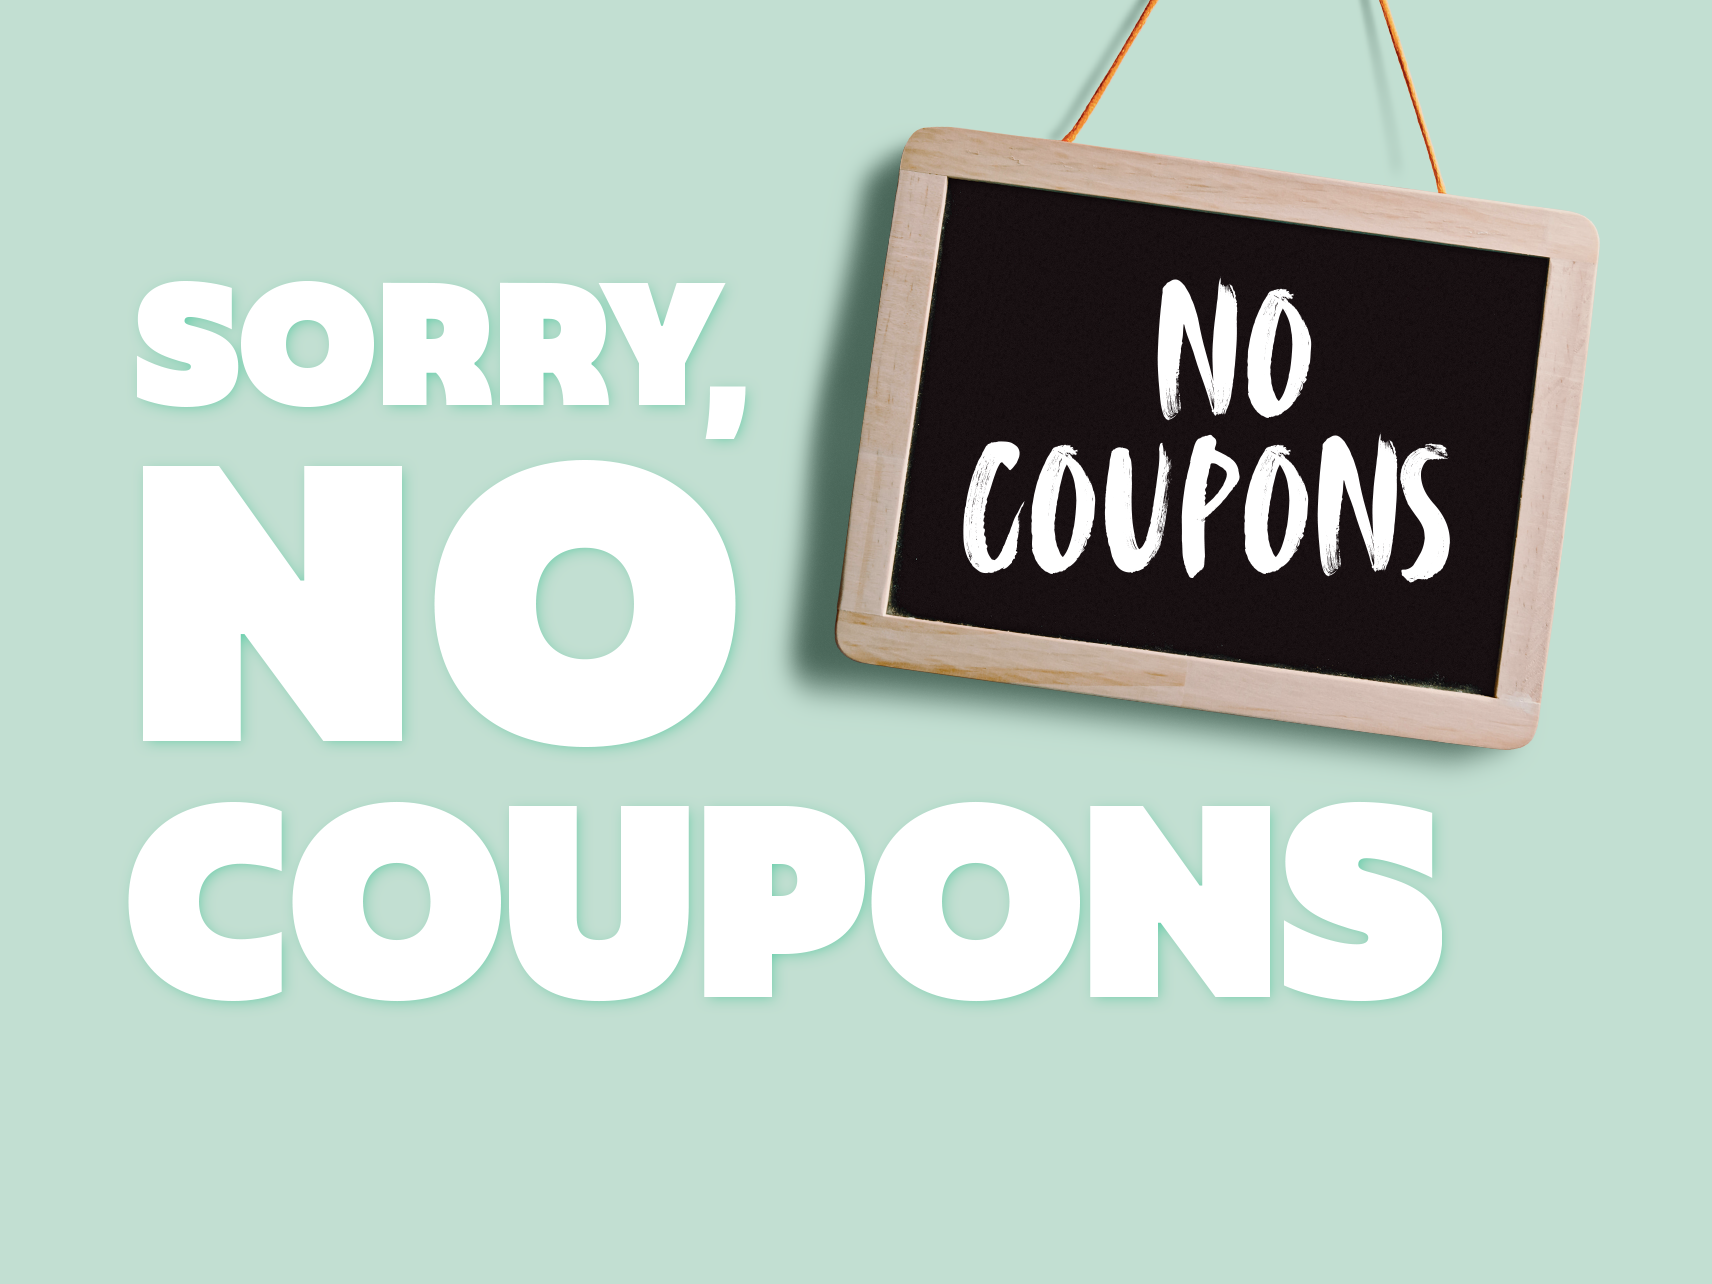 Sunday Coupon Preview For 12/18 – NO INSERTS!